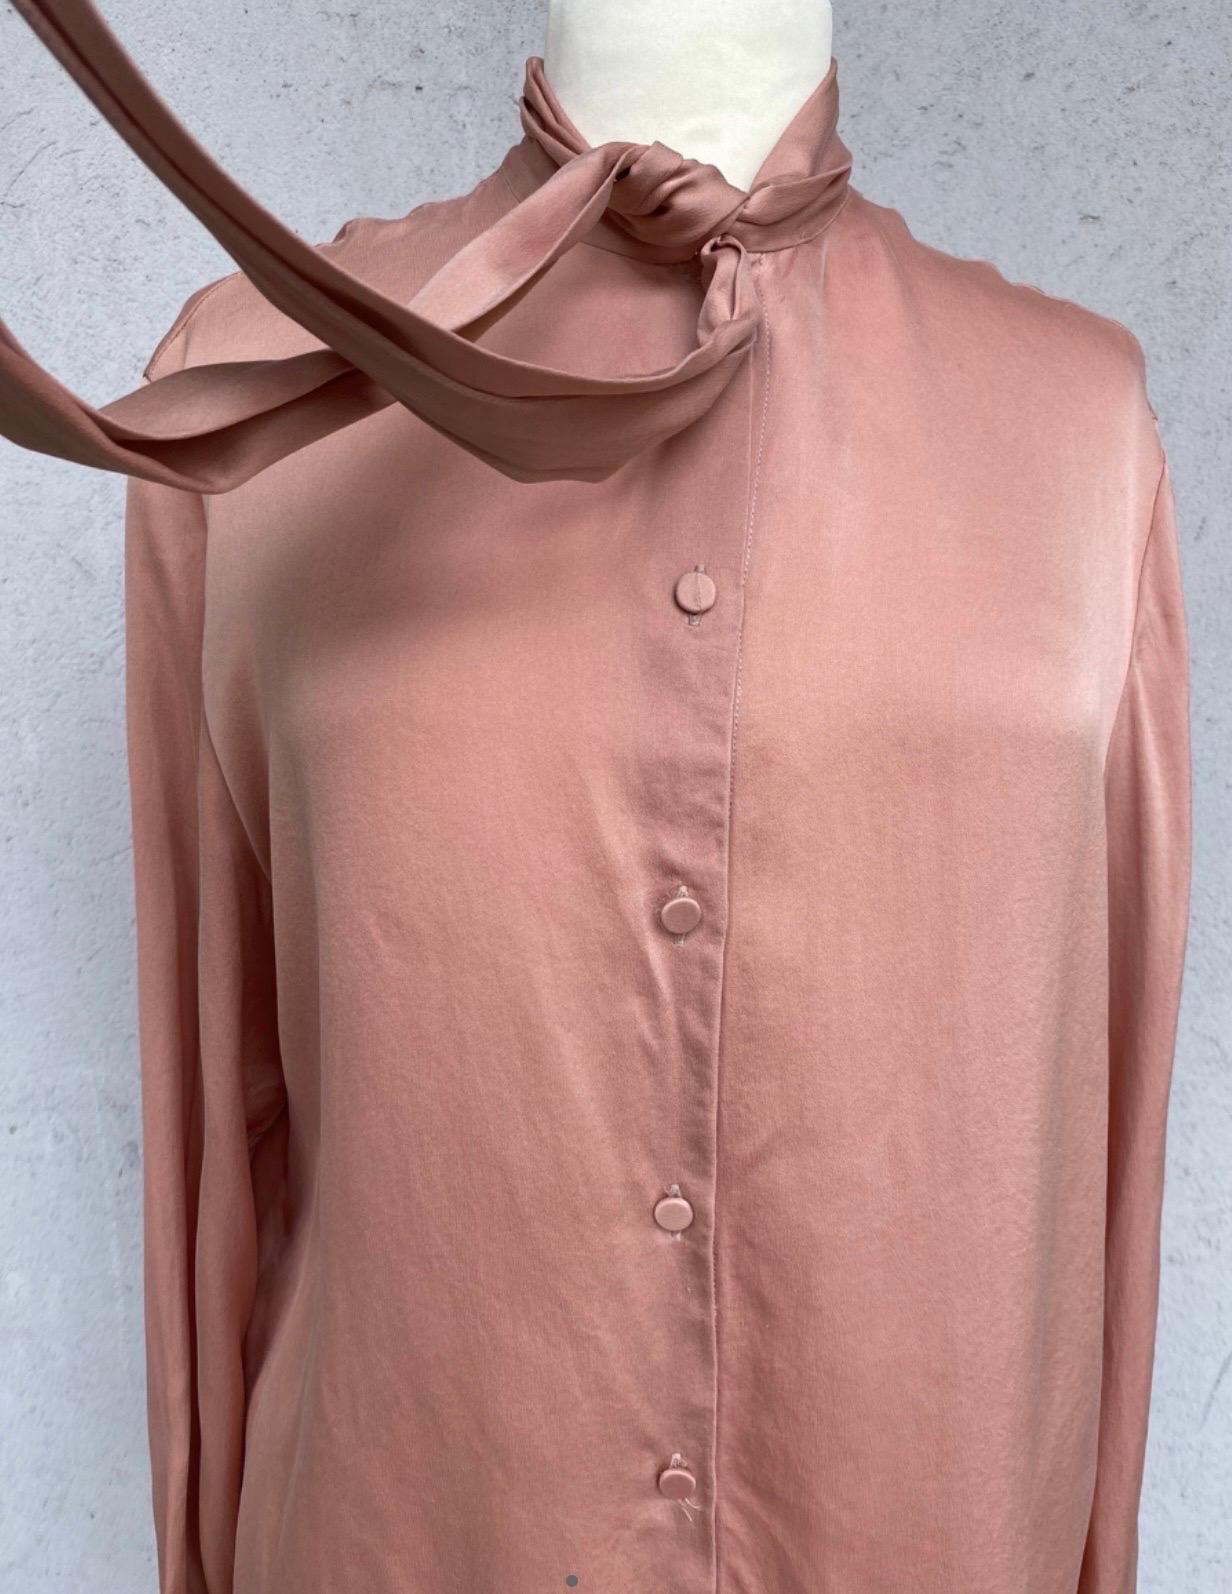 Gucci shirt in pink color silk, size 42, loose fit, button closure on the front covered by two long strips of fabric starting from the neck where it is possible to style a bow, measurements: shoulder 42cm sleeve 62cm chest 42cm length 70cm, in very